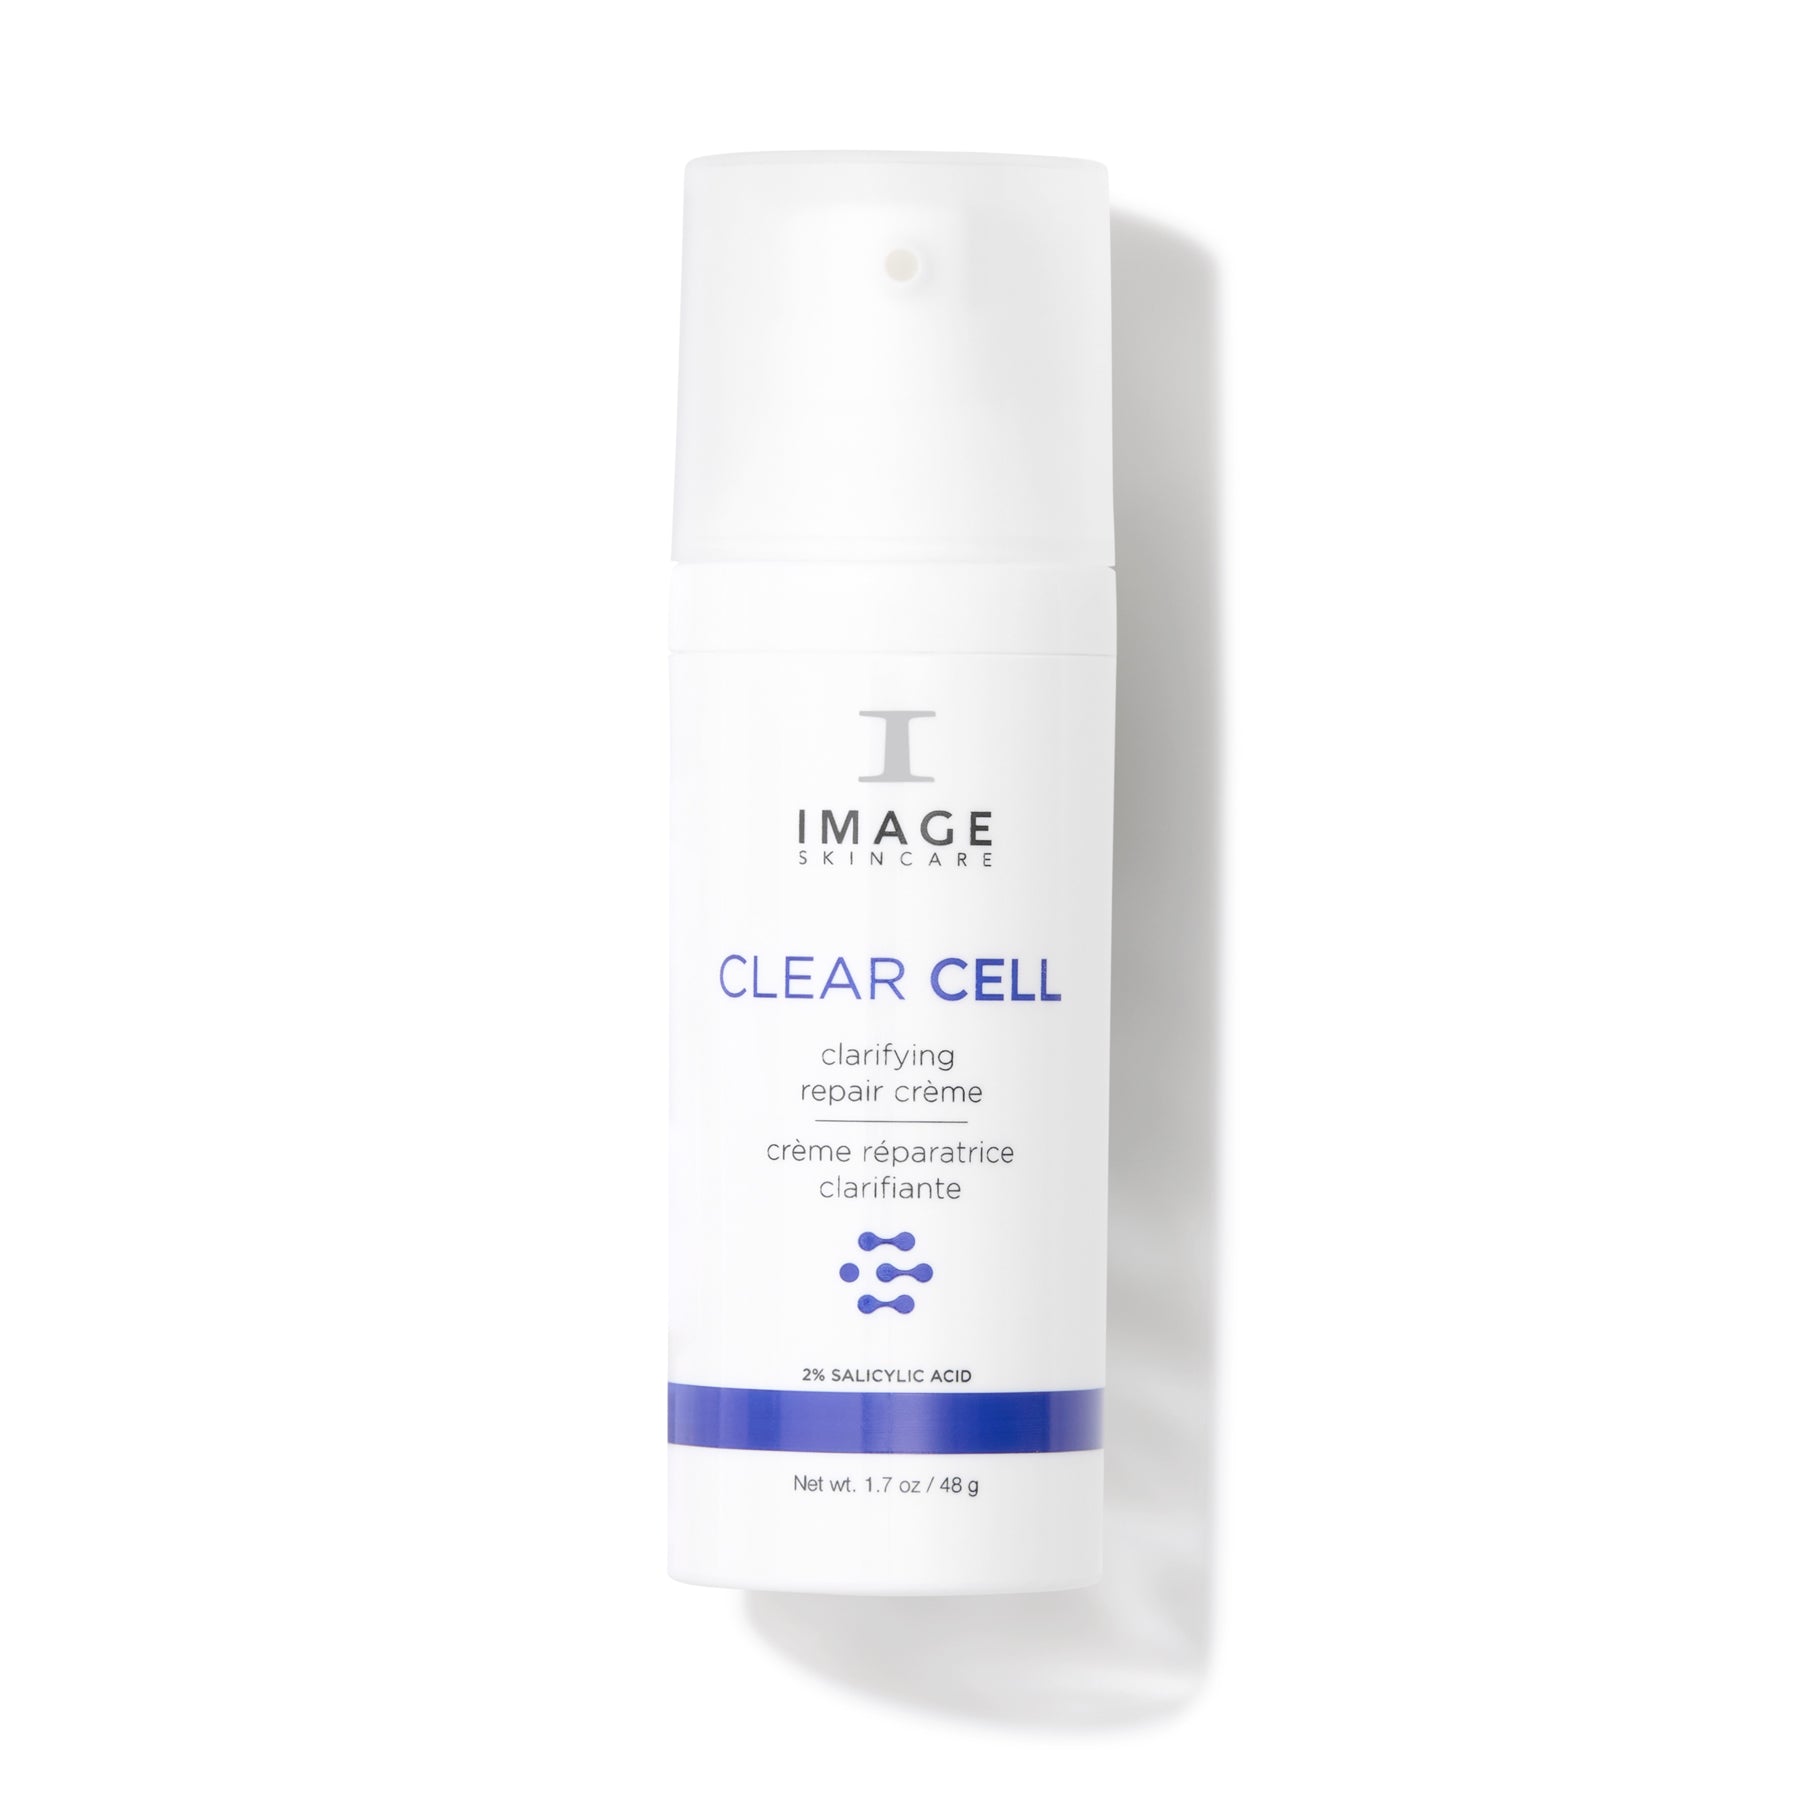 Image Skincare Clear Cell Clarifying Repair Creme Shop At Exclusive Beauty